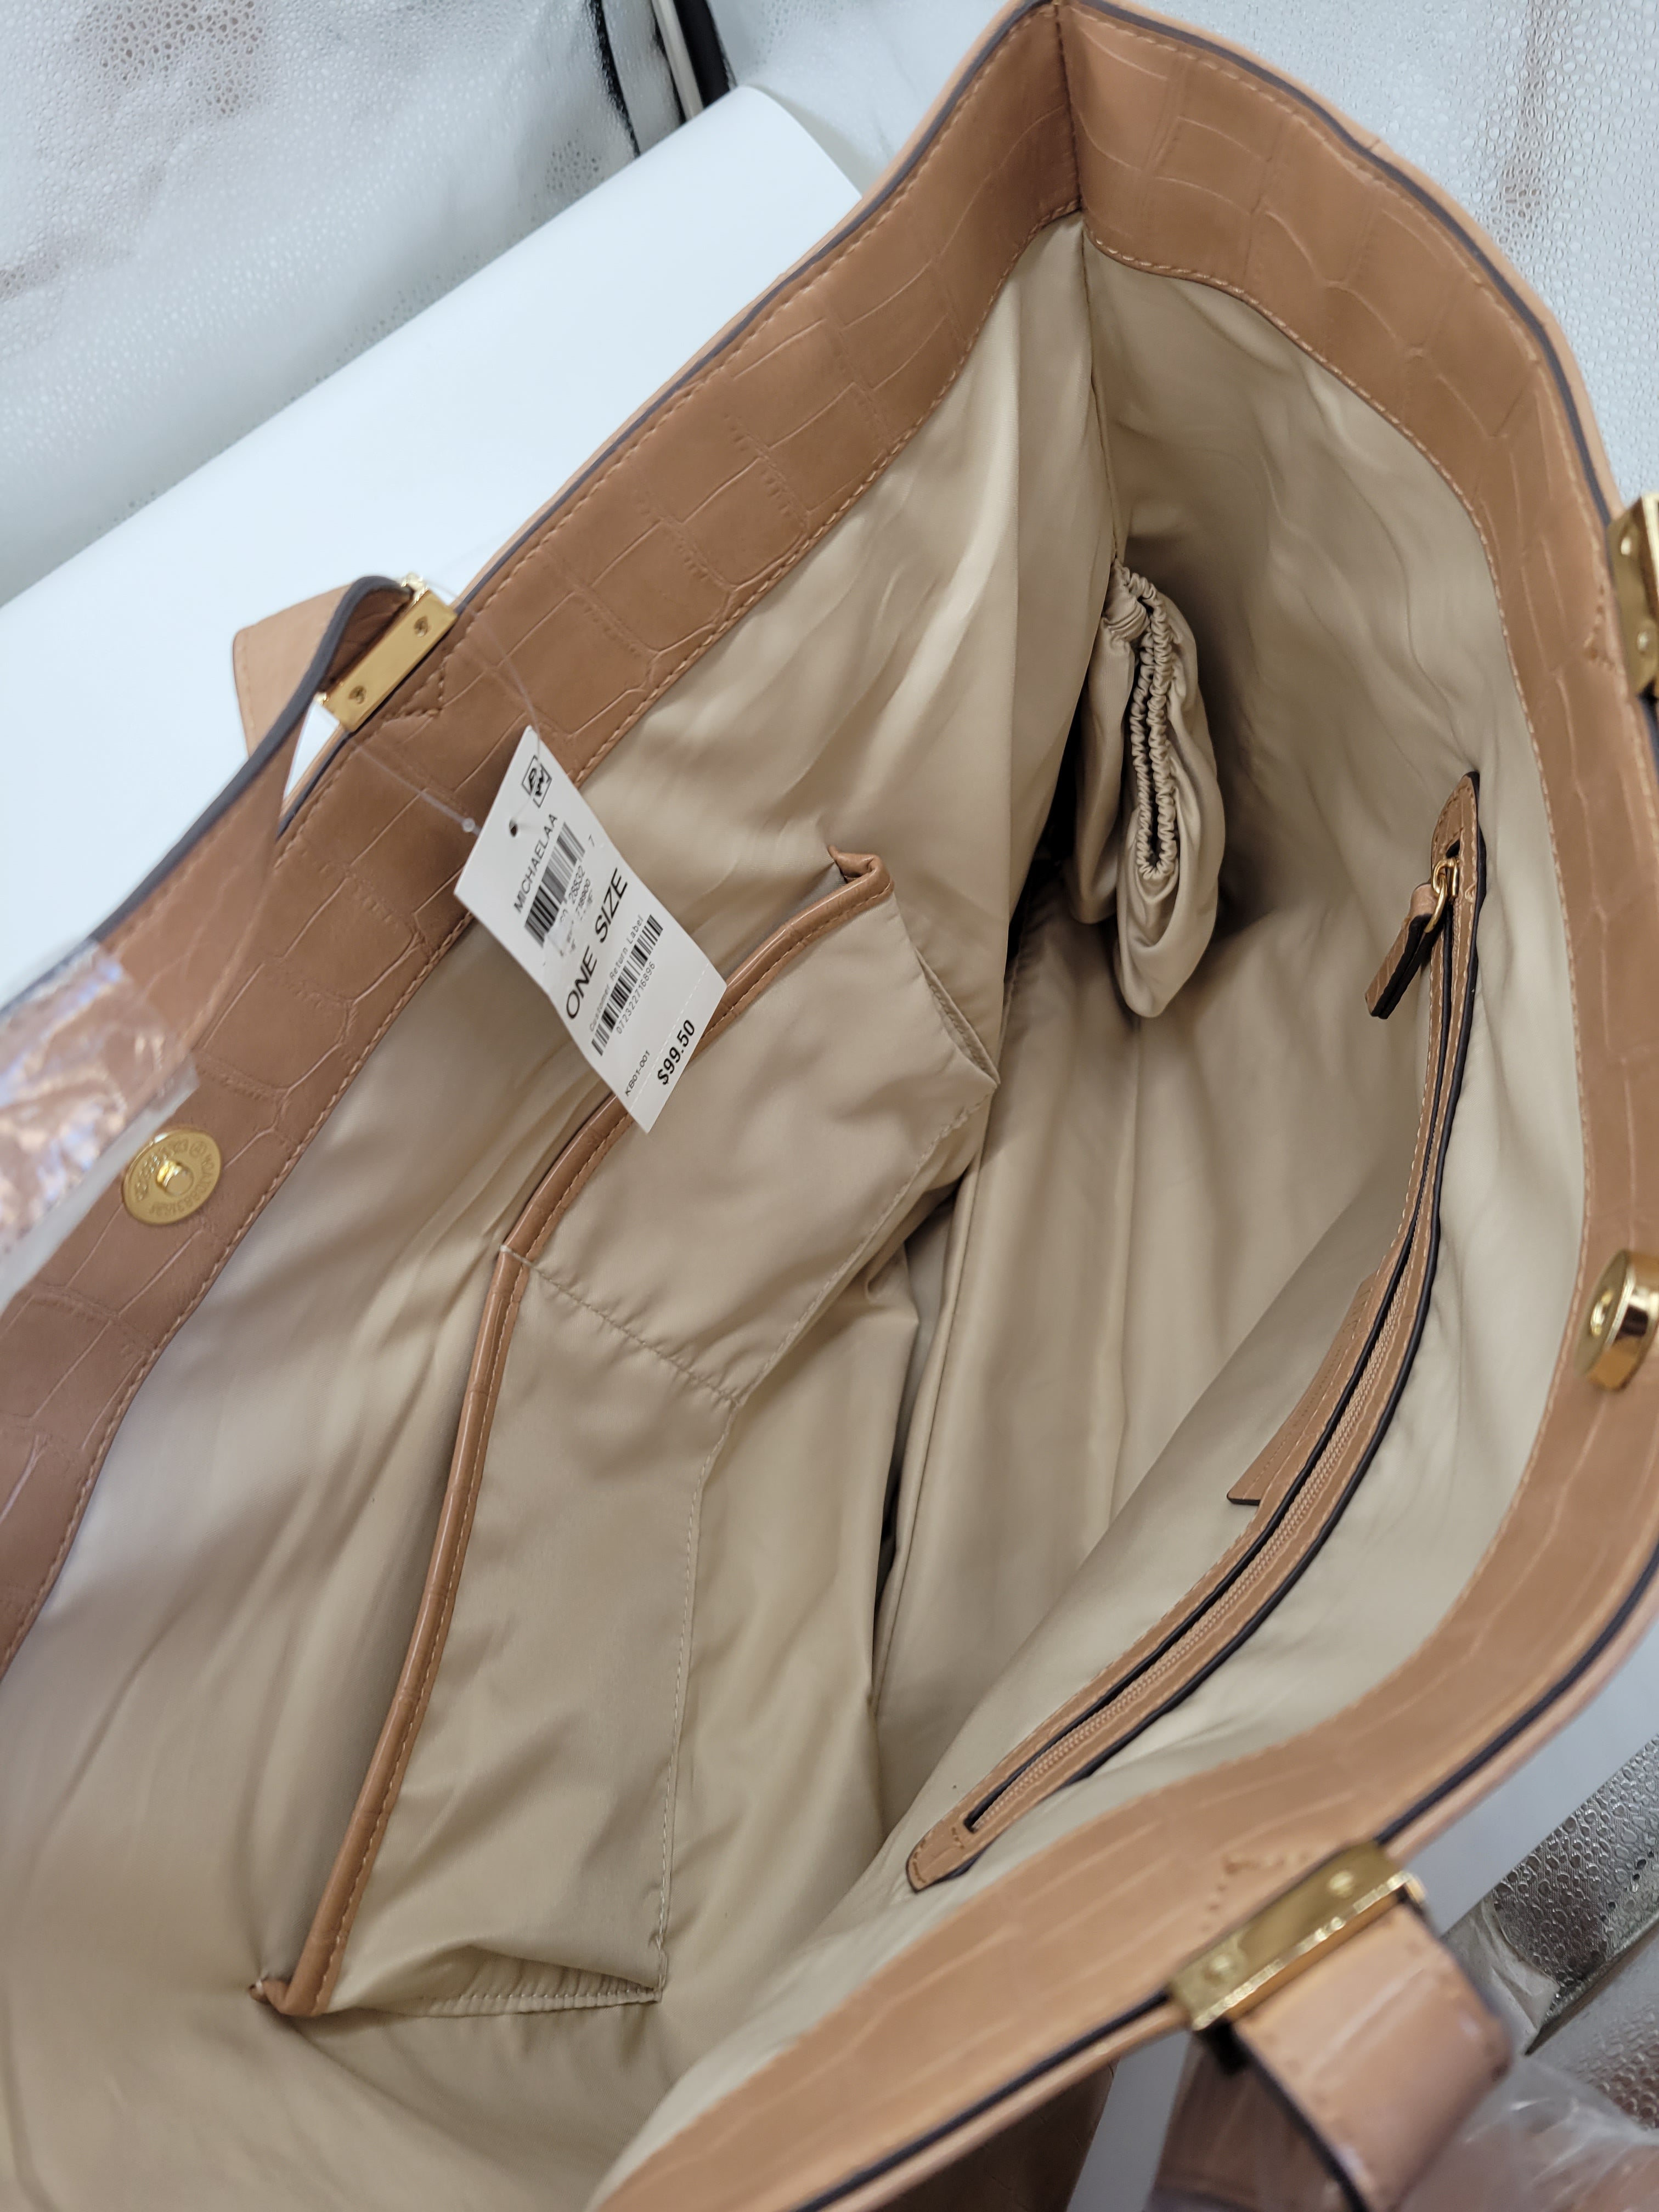 INC INTERNATIONAL CONCEPTS Michaela Tote in Camel